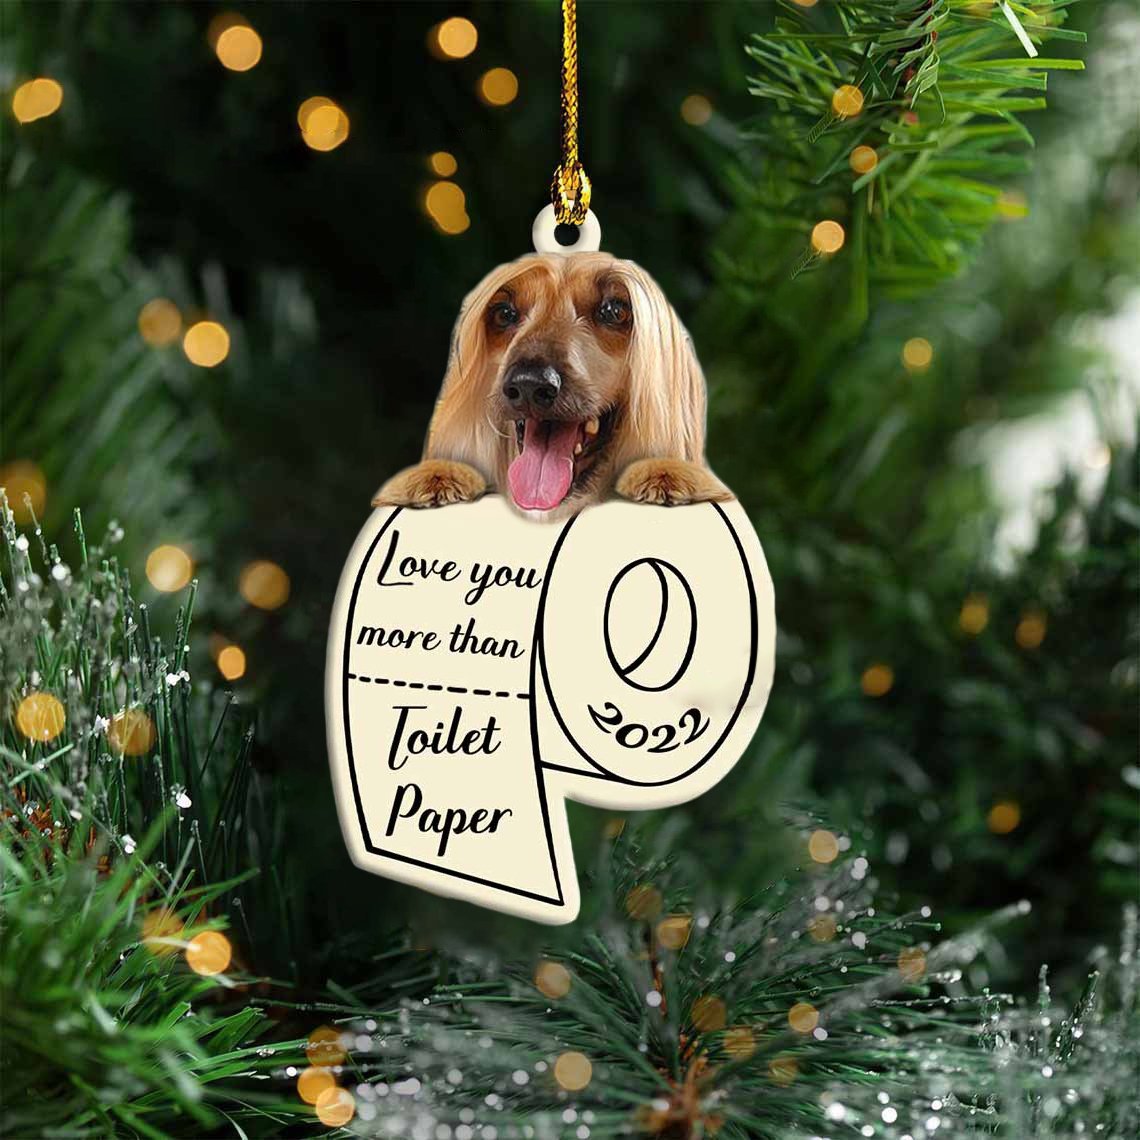 Afghan Hound Love You More Than Toilet Paper 2022 Hanging Ornament